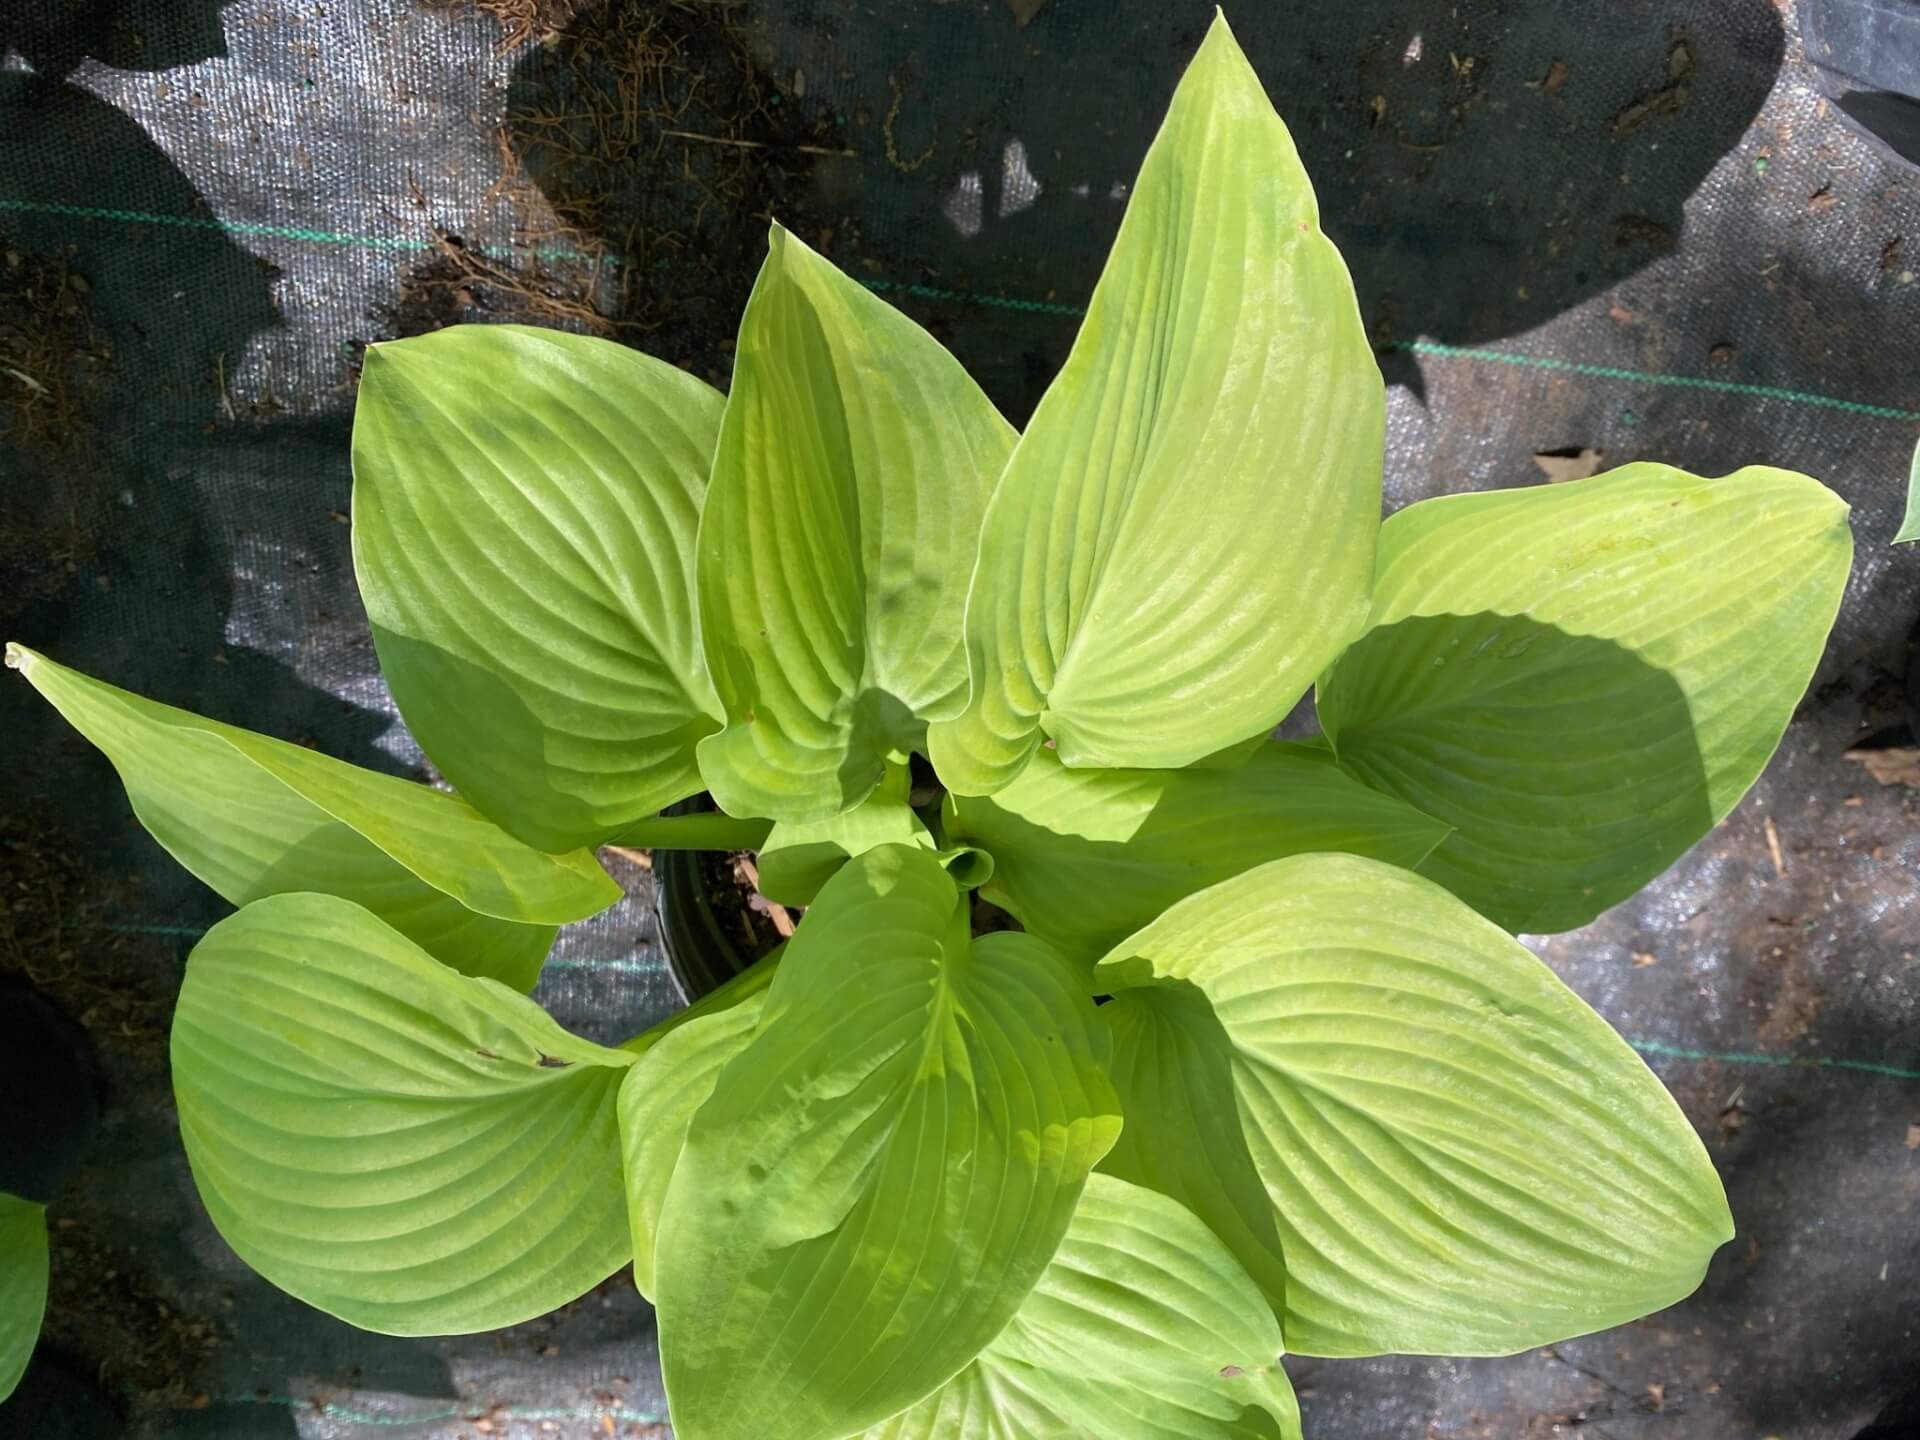 Bright green oval leaves